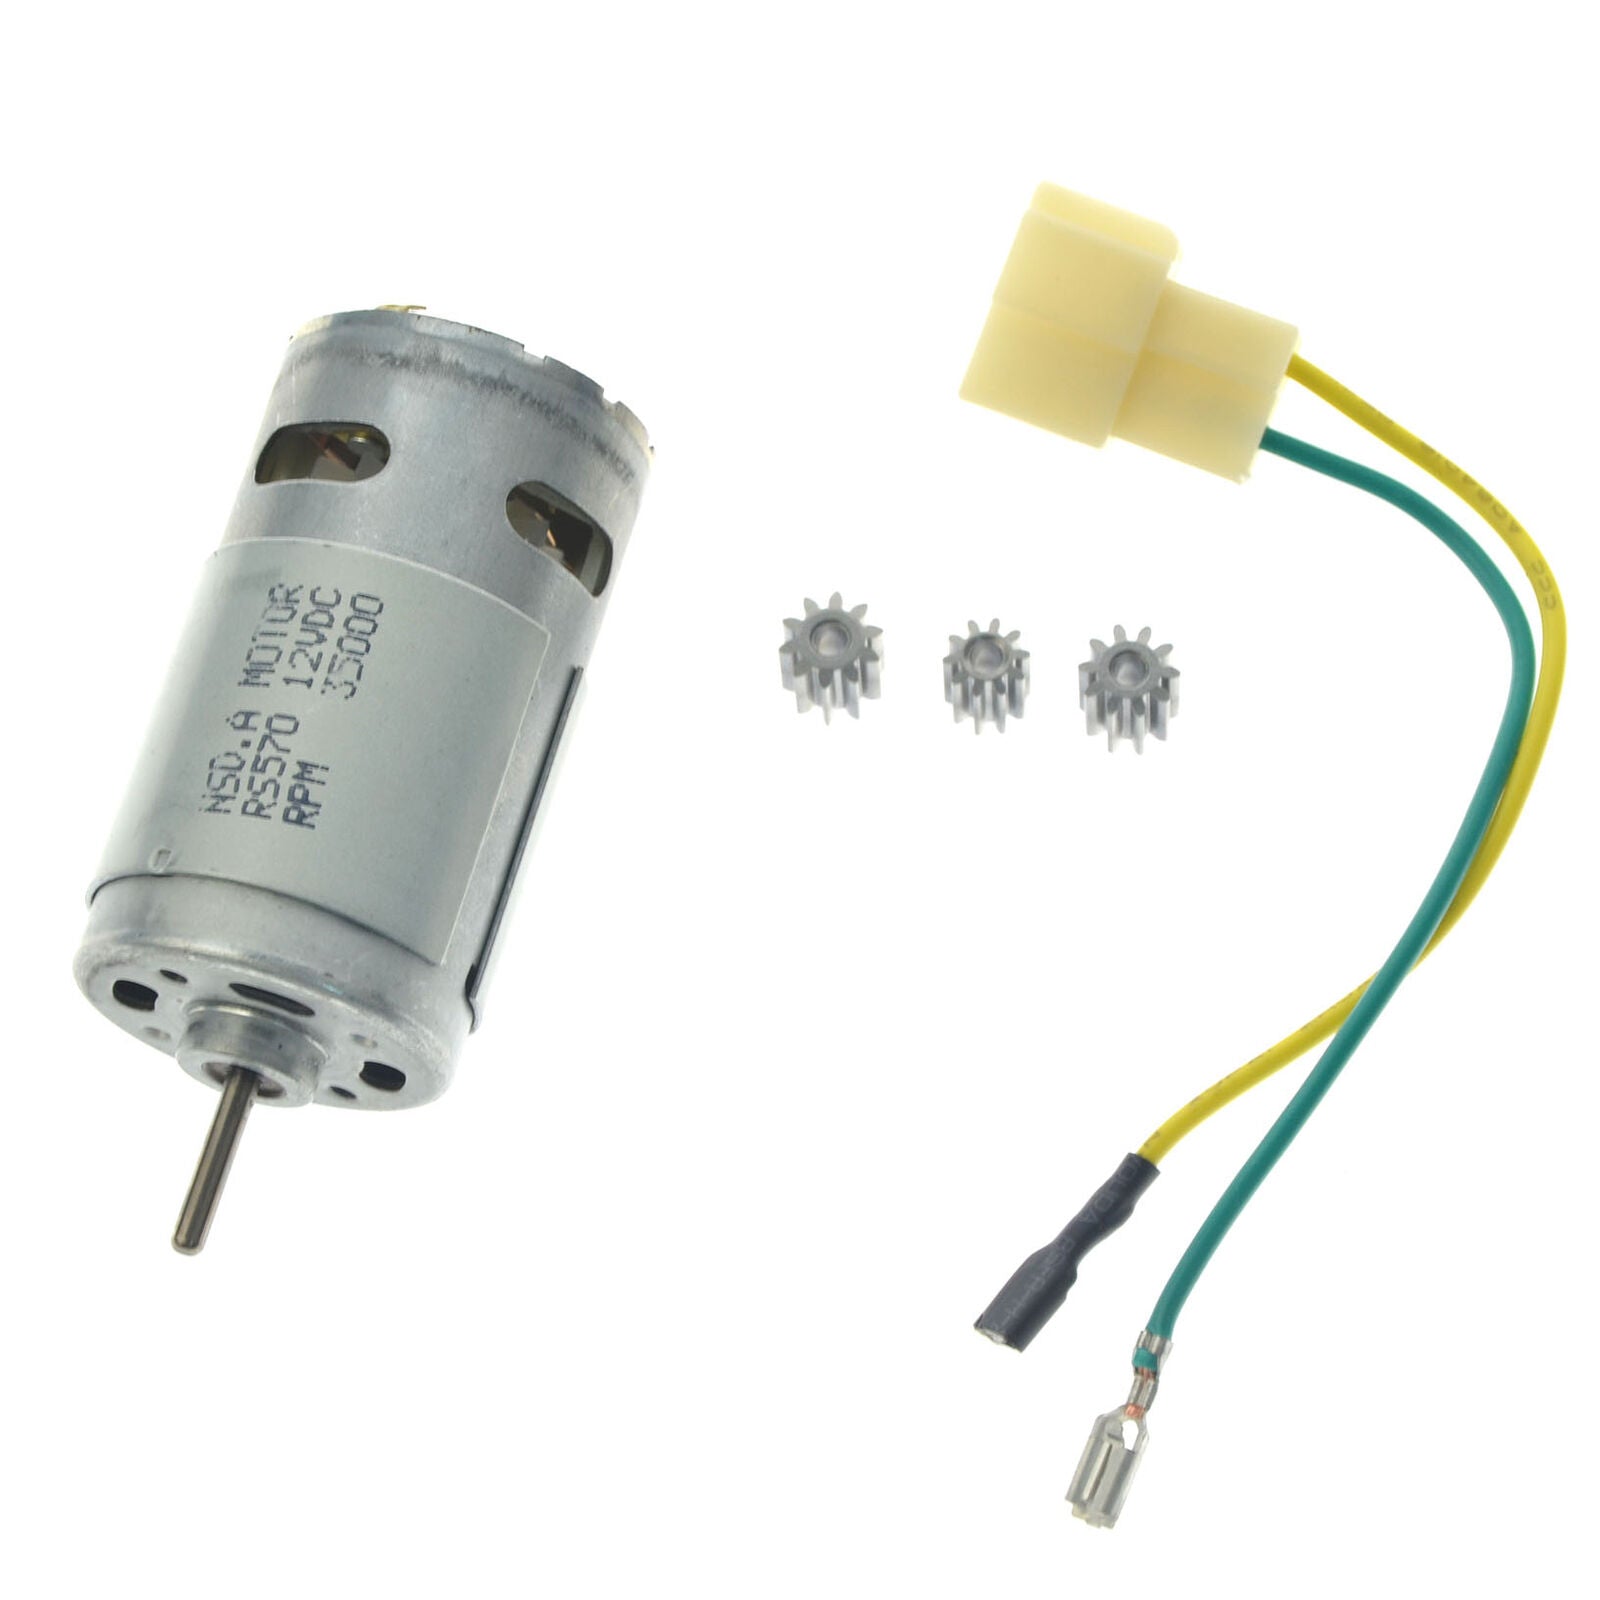 For RC Electric Bike Motorcycle Gear Motor Toys 12V DC 35000 Rpm 65W Accessory